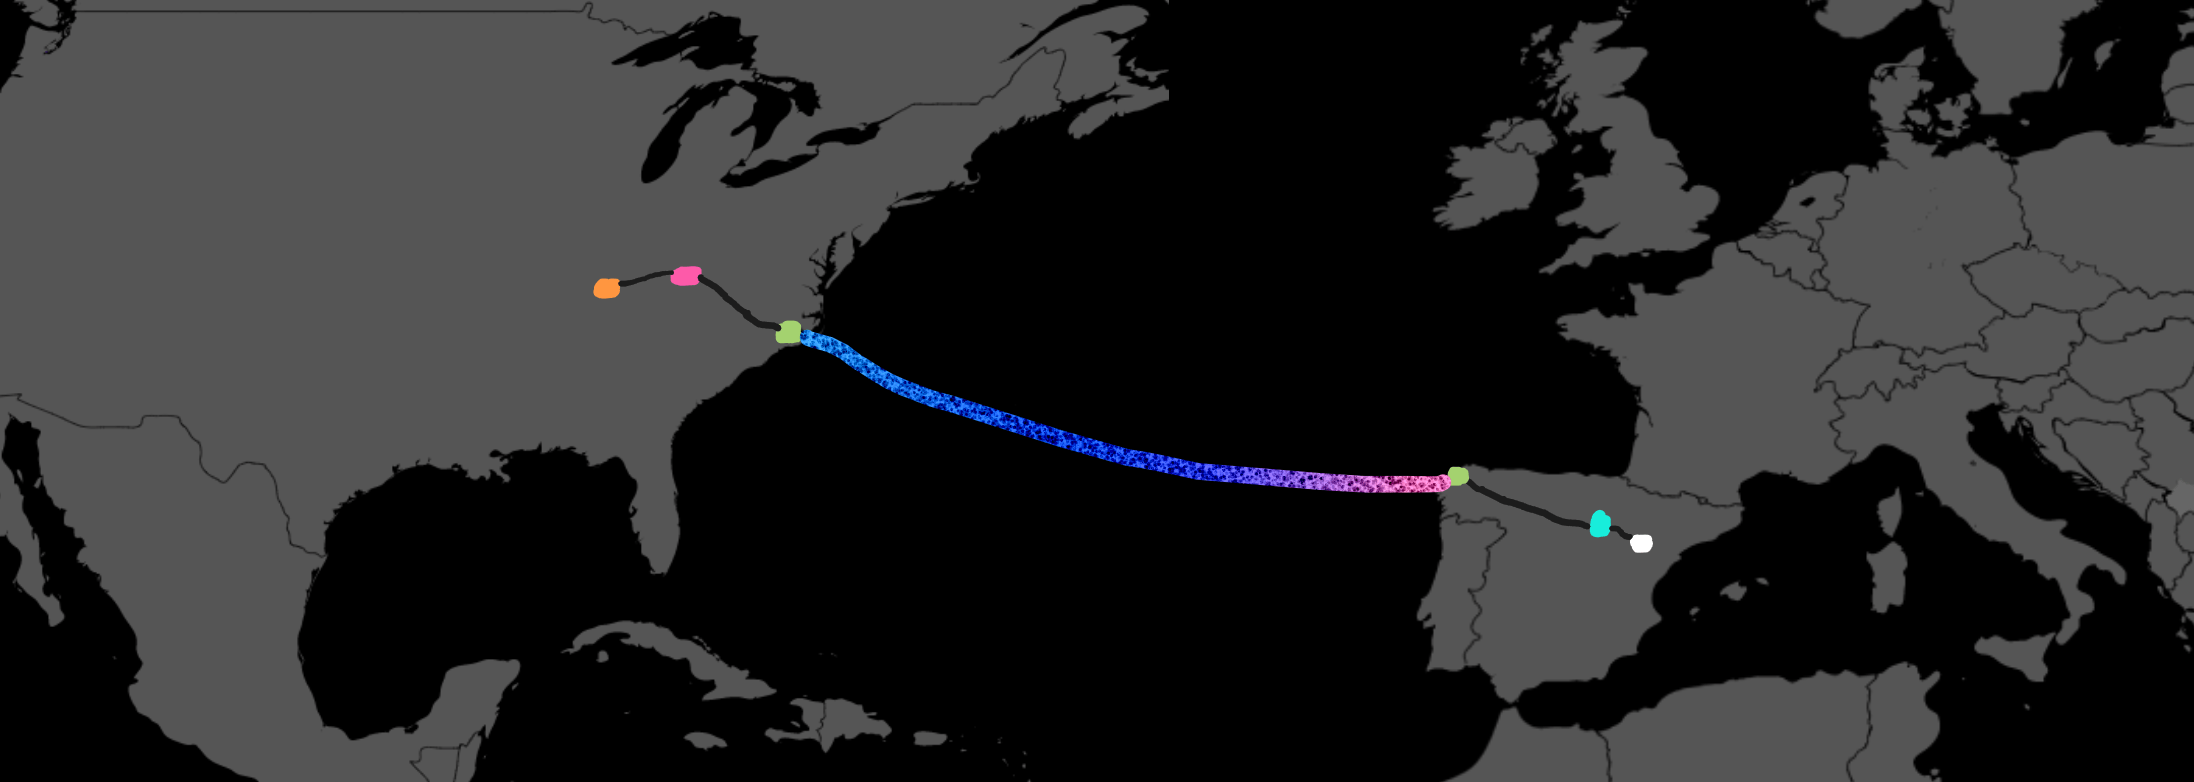 IXPs in America and Europe are connected using rainbow colored undersea cable